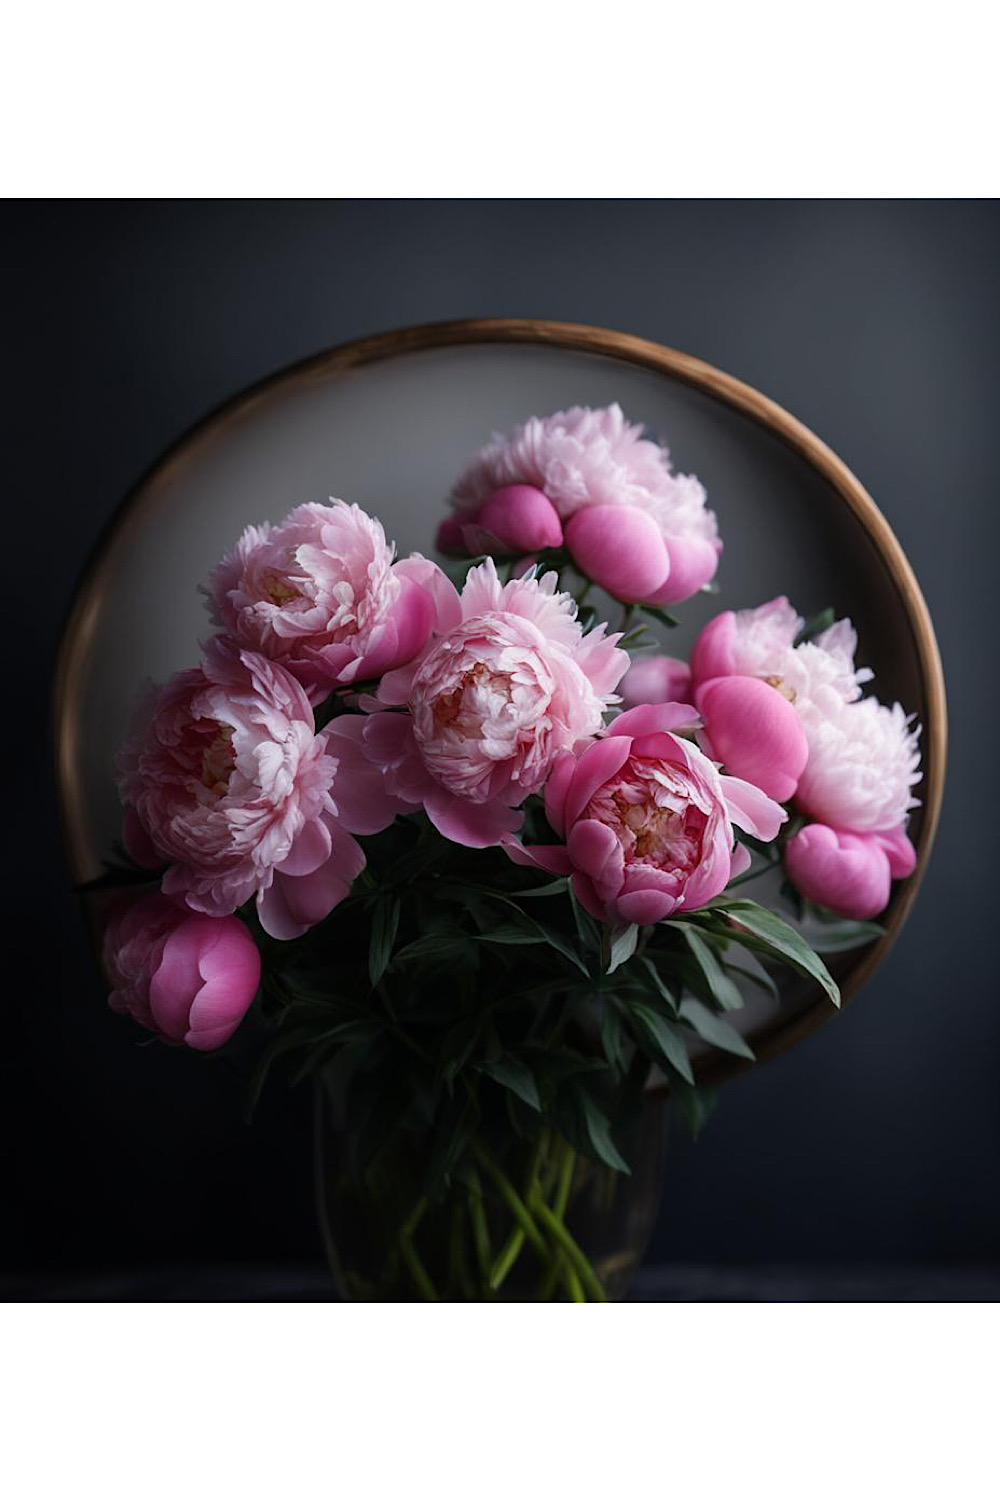 A bouquet of peonies pinterest preview image.